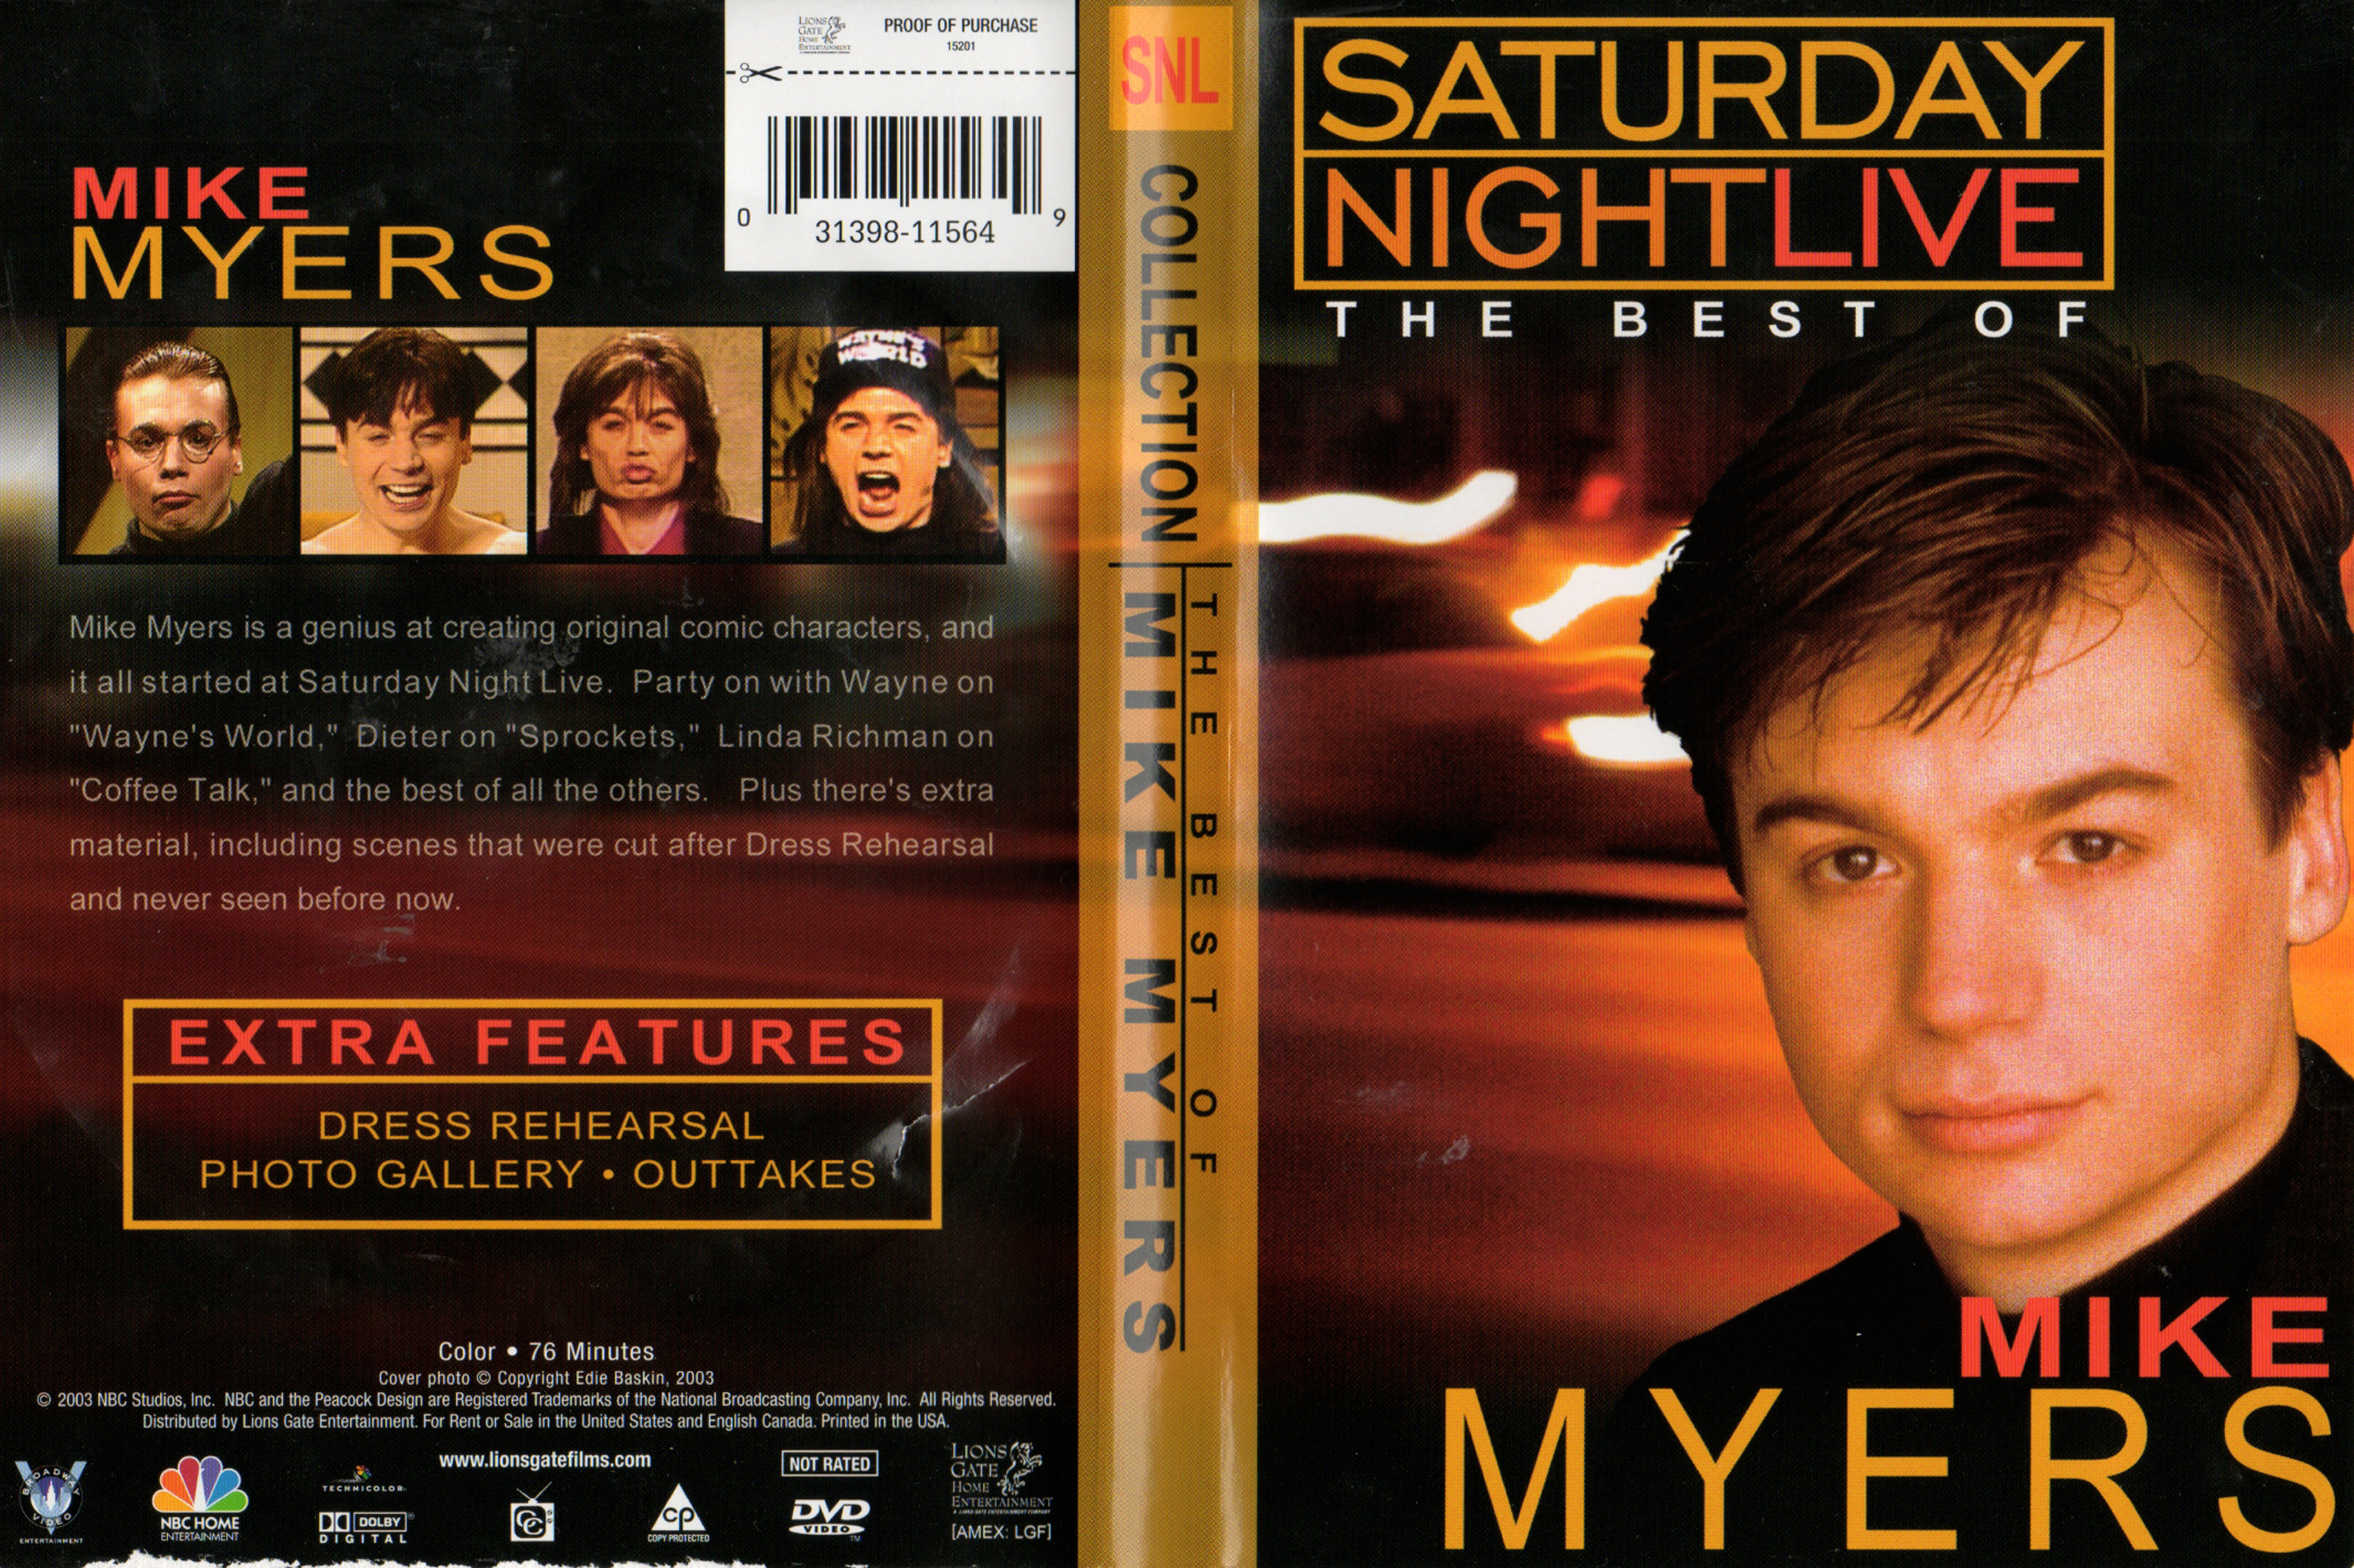 Jaquette DVD Saturday night live - Mike Myers